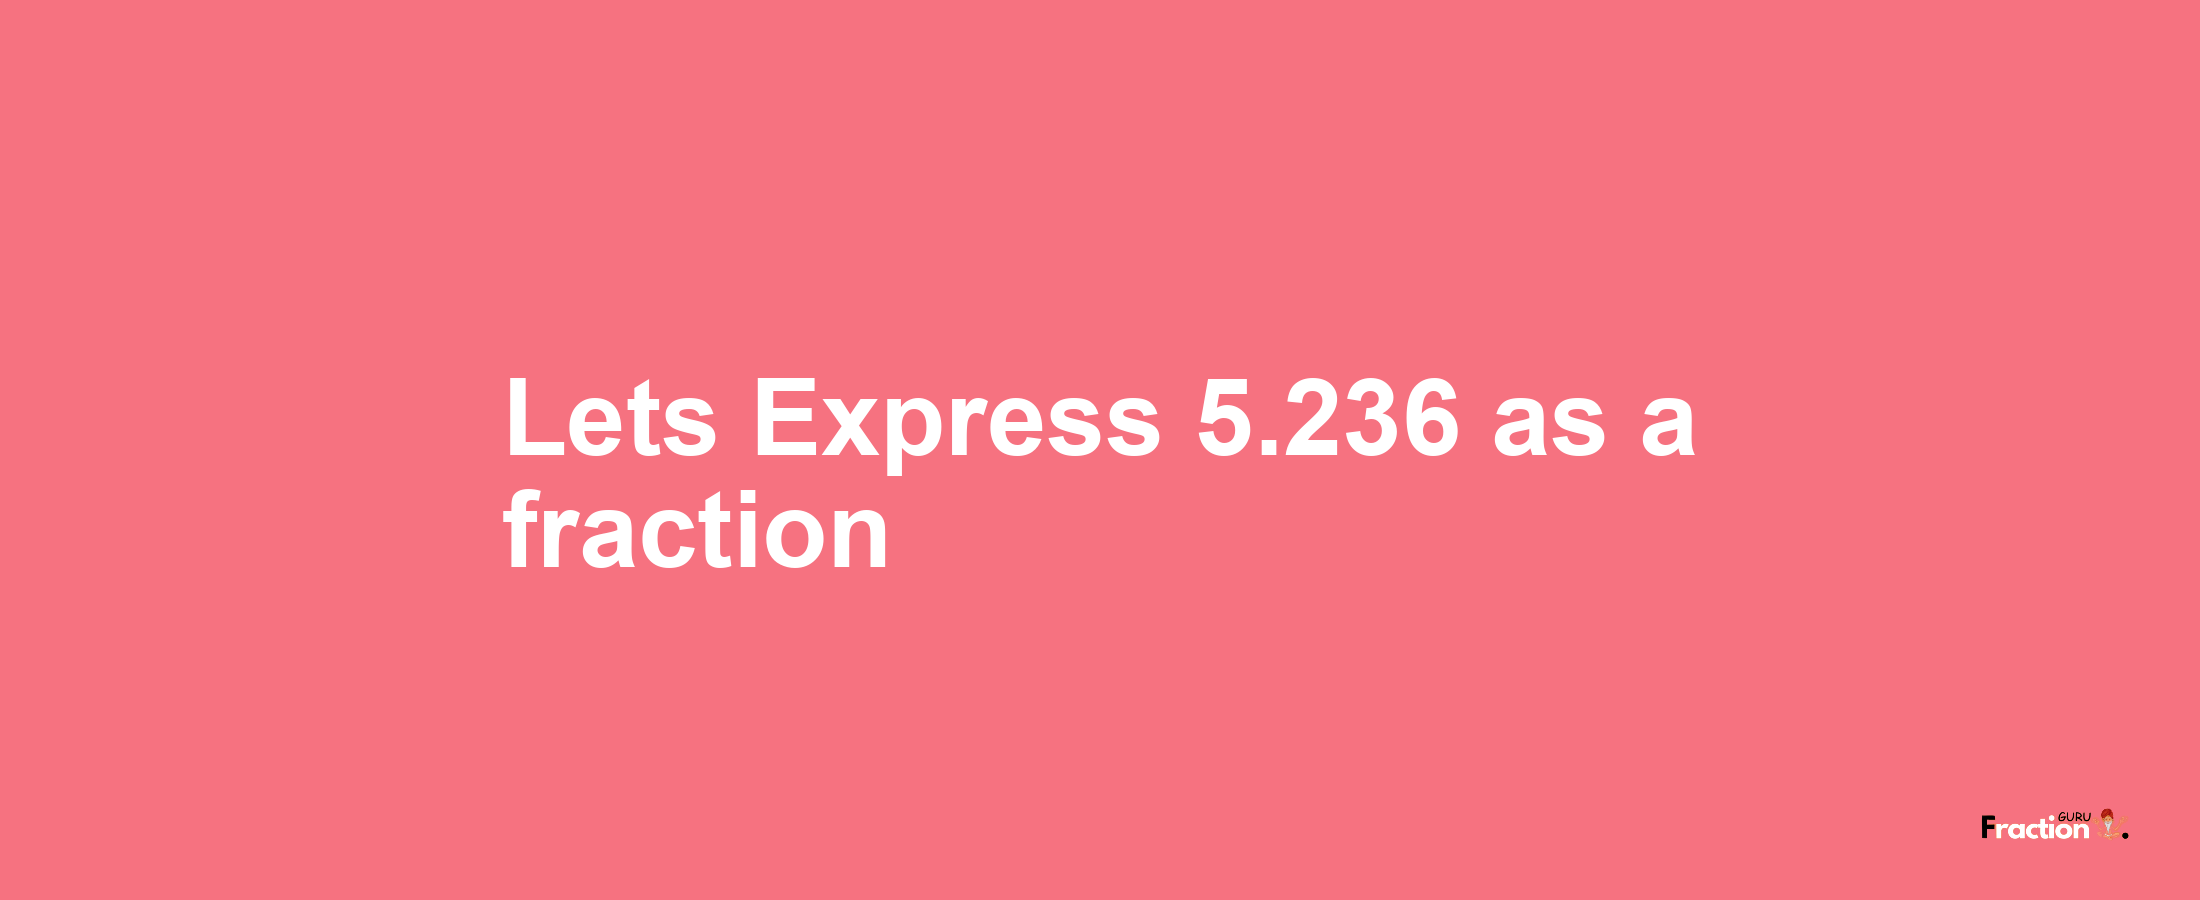 Lets Express 5.236 as afraction